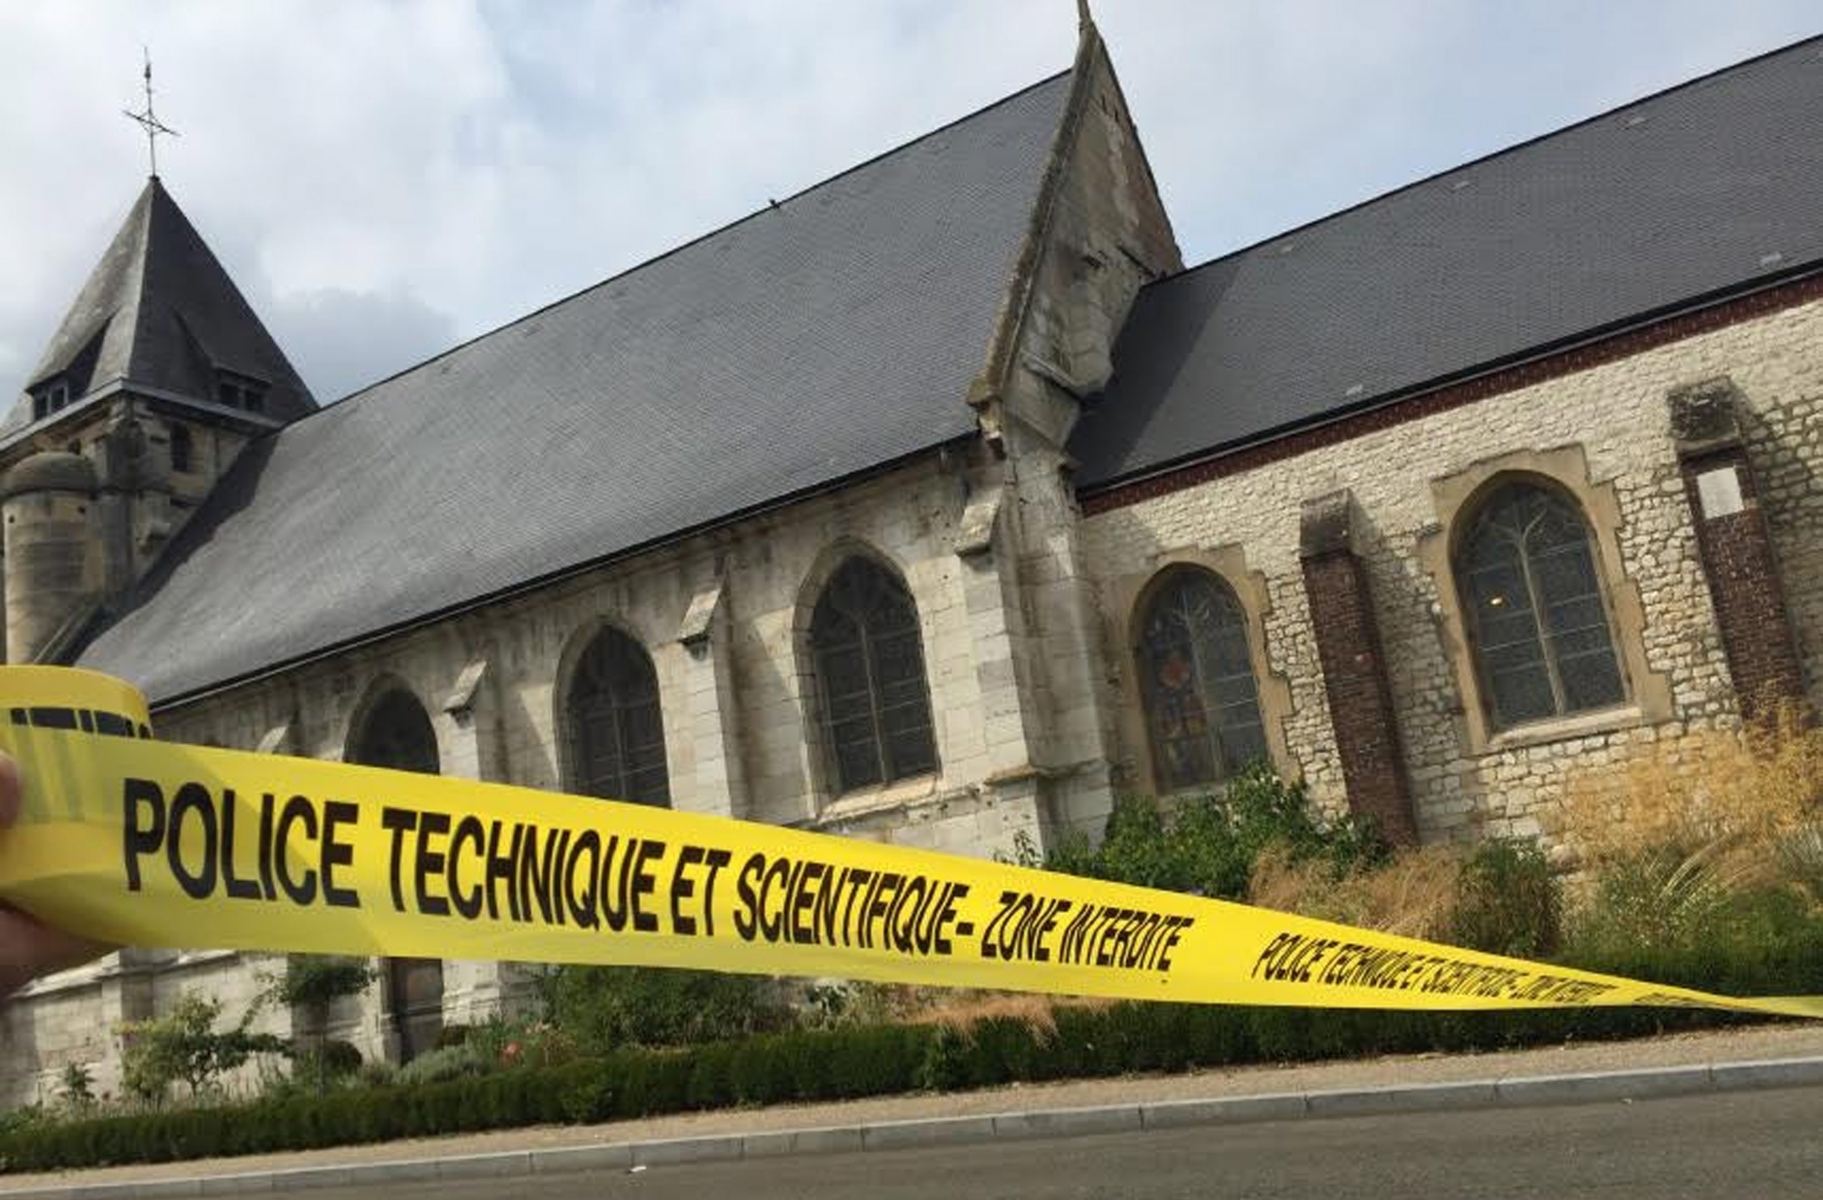 epa05442064 A handout picture provided by Police Nationale on 26 July 2016 shows police cordoning off a church where a hostage incident occured in Saint-Etienne-du-Rouvray, near Rouen, France, 26 July 2016. According to reports, two hostage takers were killed by the police after they took hostages at a church in Saint Etienne du Douvray. One of the hostages, a priest was killed by one of the perpetrators.  EPA/POLICE NATIONALE / HANDOUT BEST QUALITY AVAILABLE HANDOUT EDITORIAL USE ONLY/NO SALES FRANCE CRIME CHURCH ATTACK